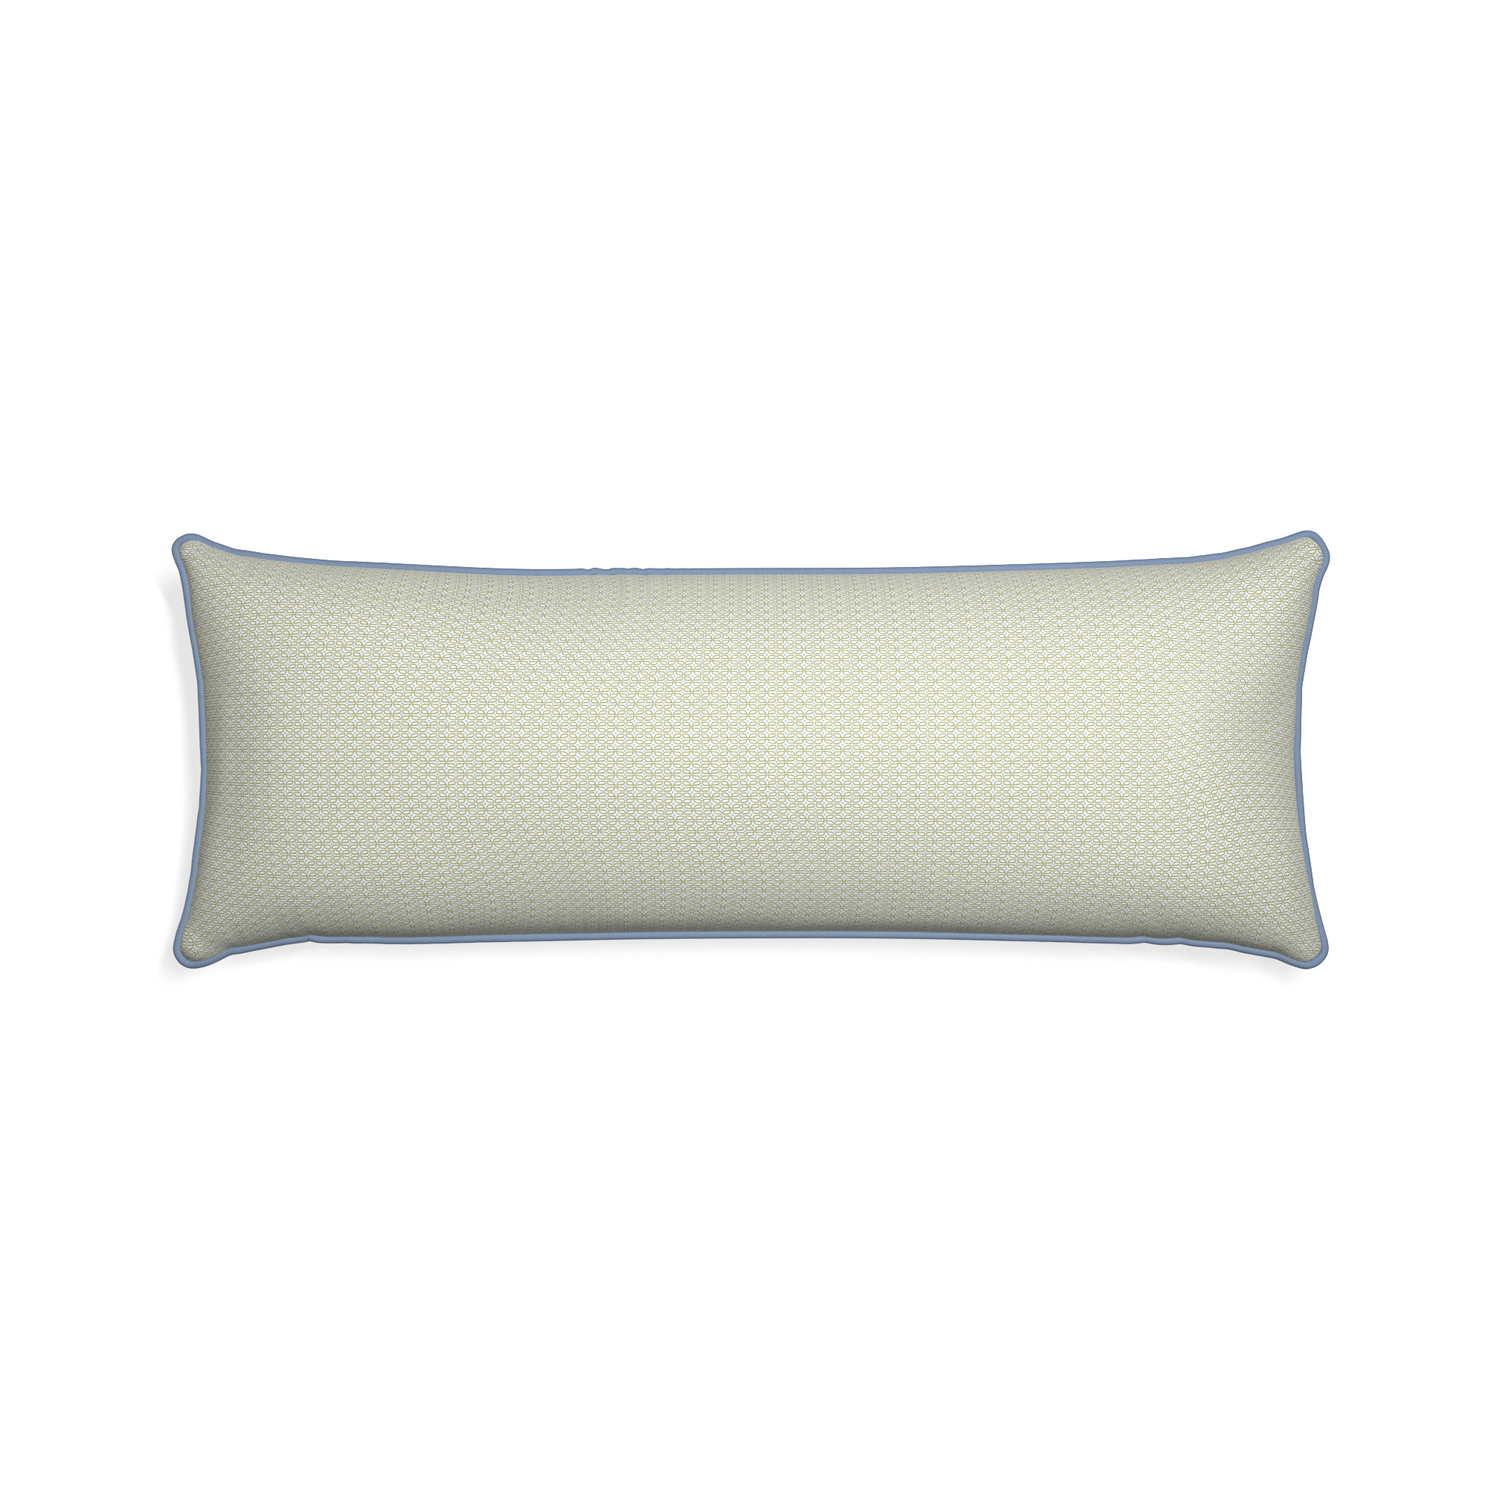 Xl-lumbar loomi moss custom moss green geometricpillow with sky piping on white background